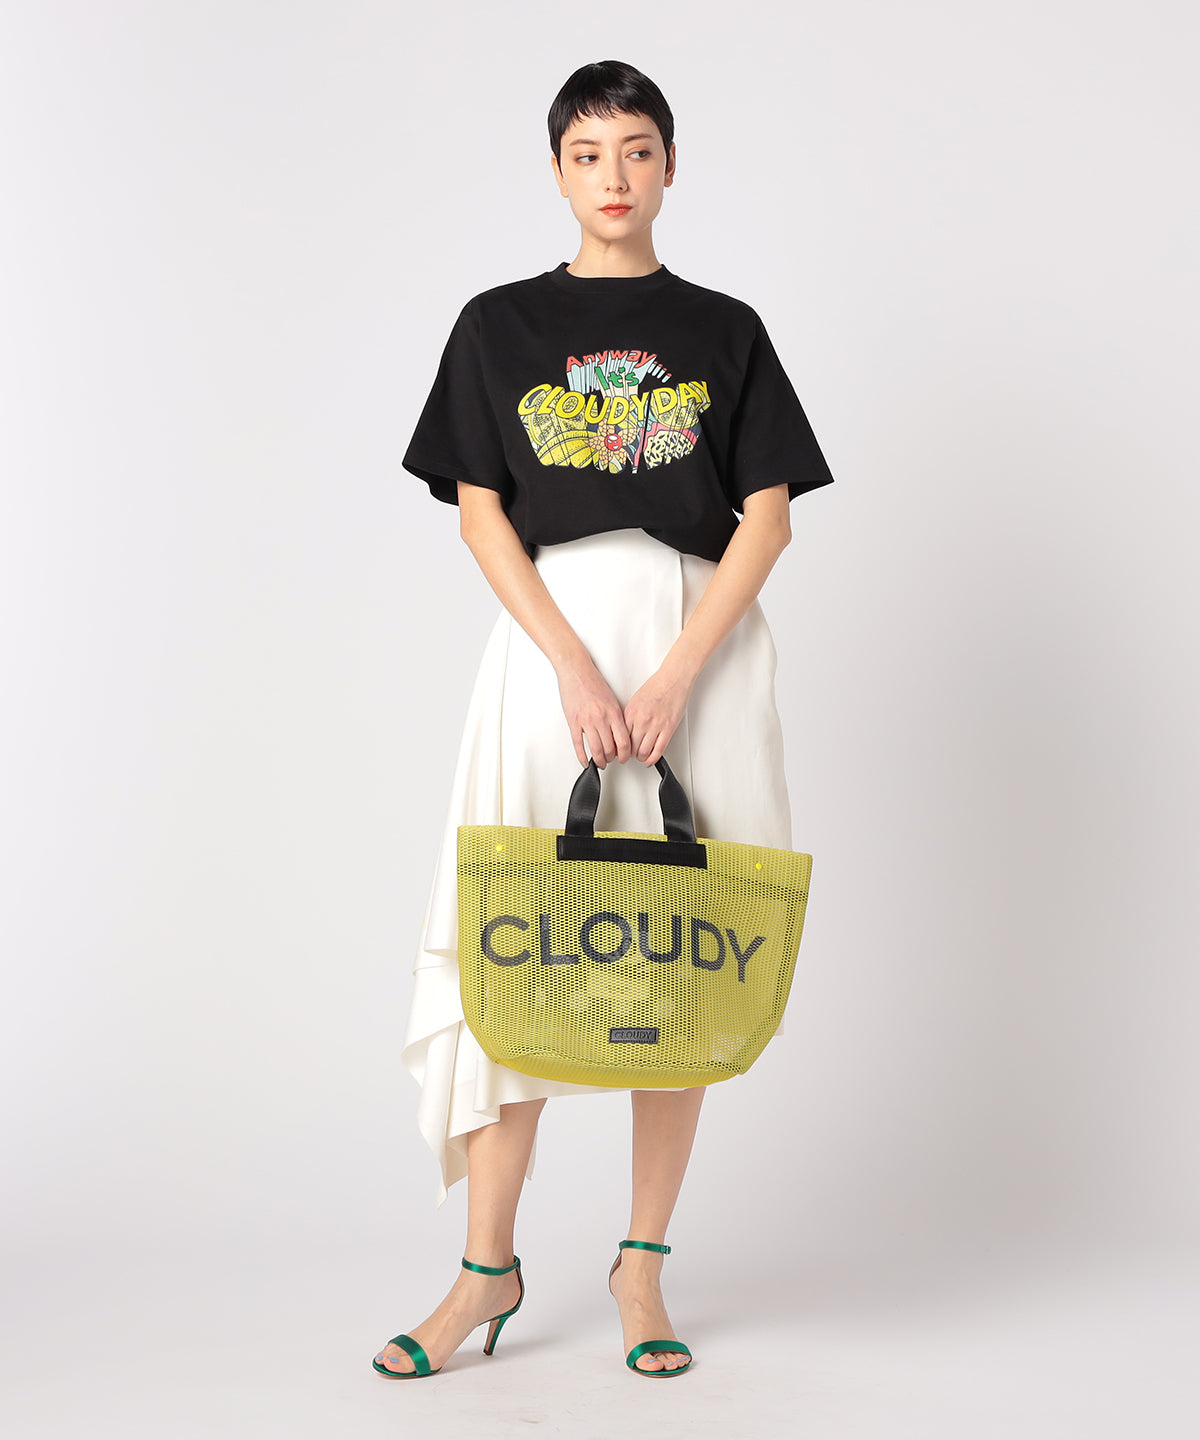 Lunch T-shirt It's CLOUDY DAY  BLACK